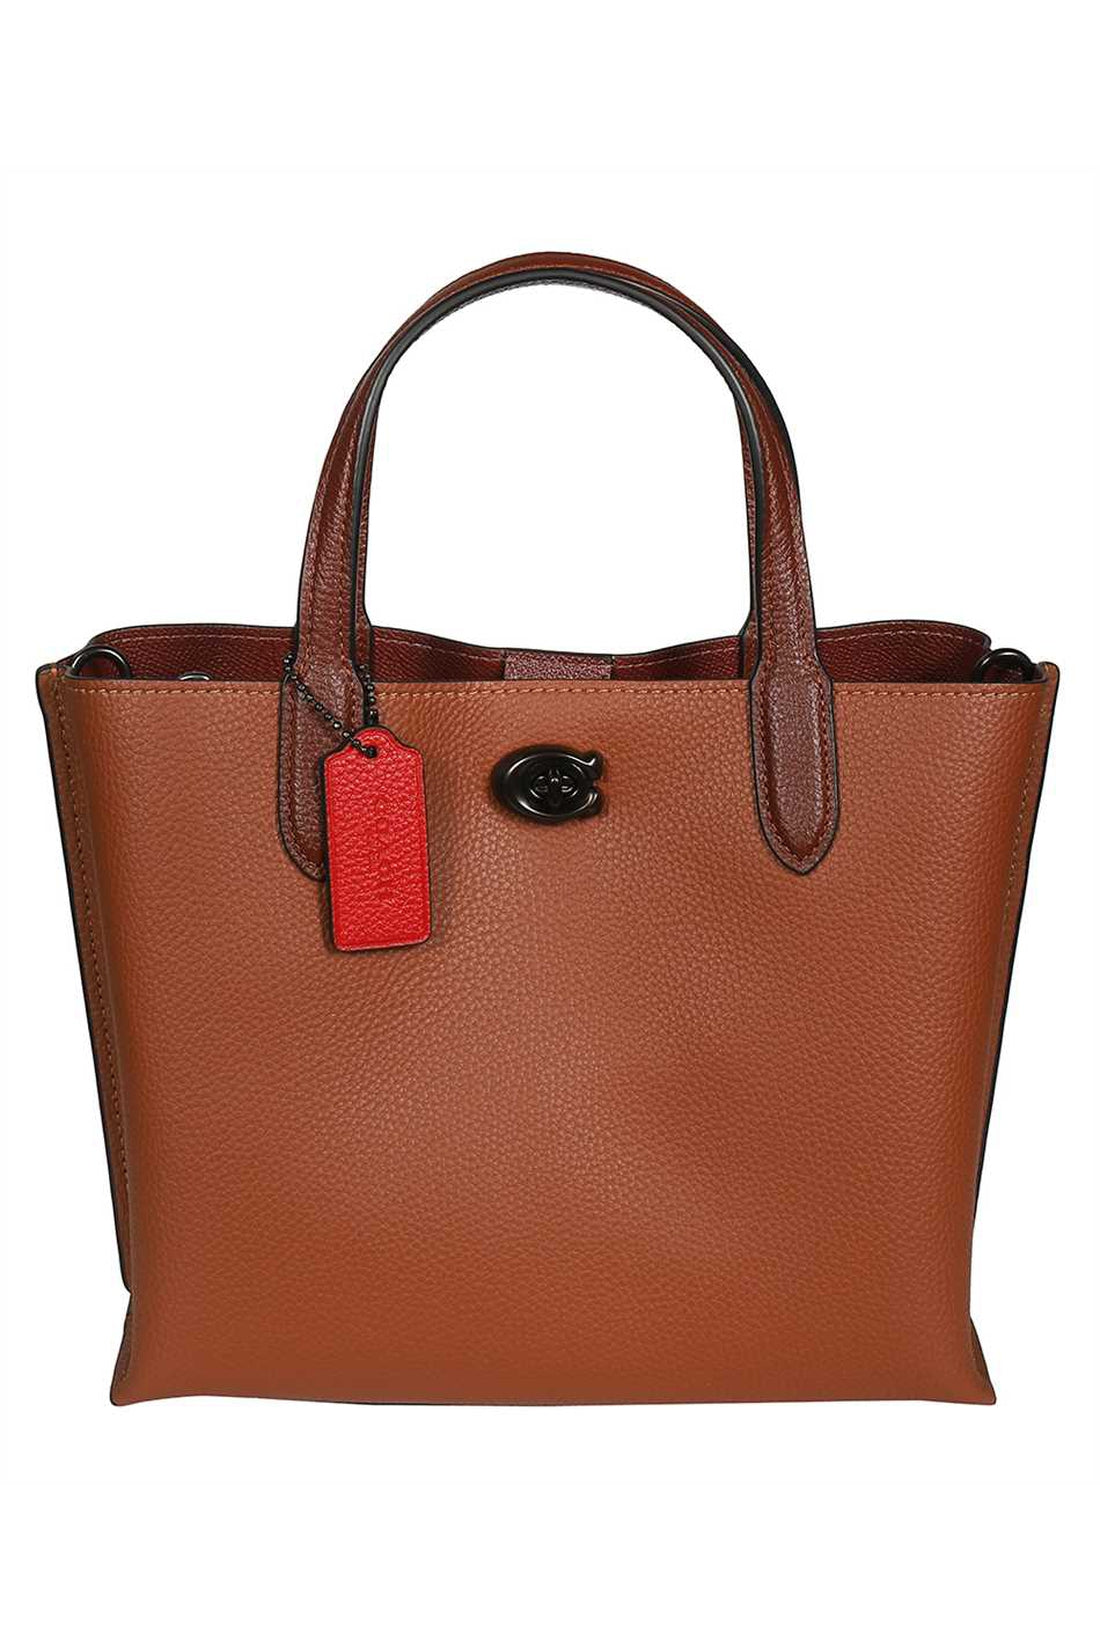 Coach-OUTLET-SALE-Willow leather tote-ARCHIVIST